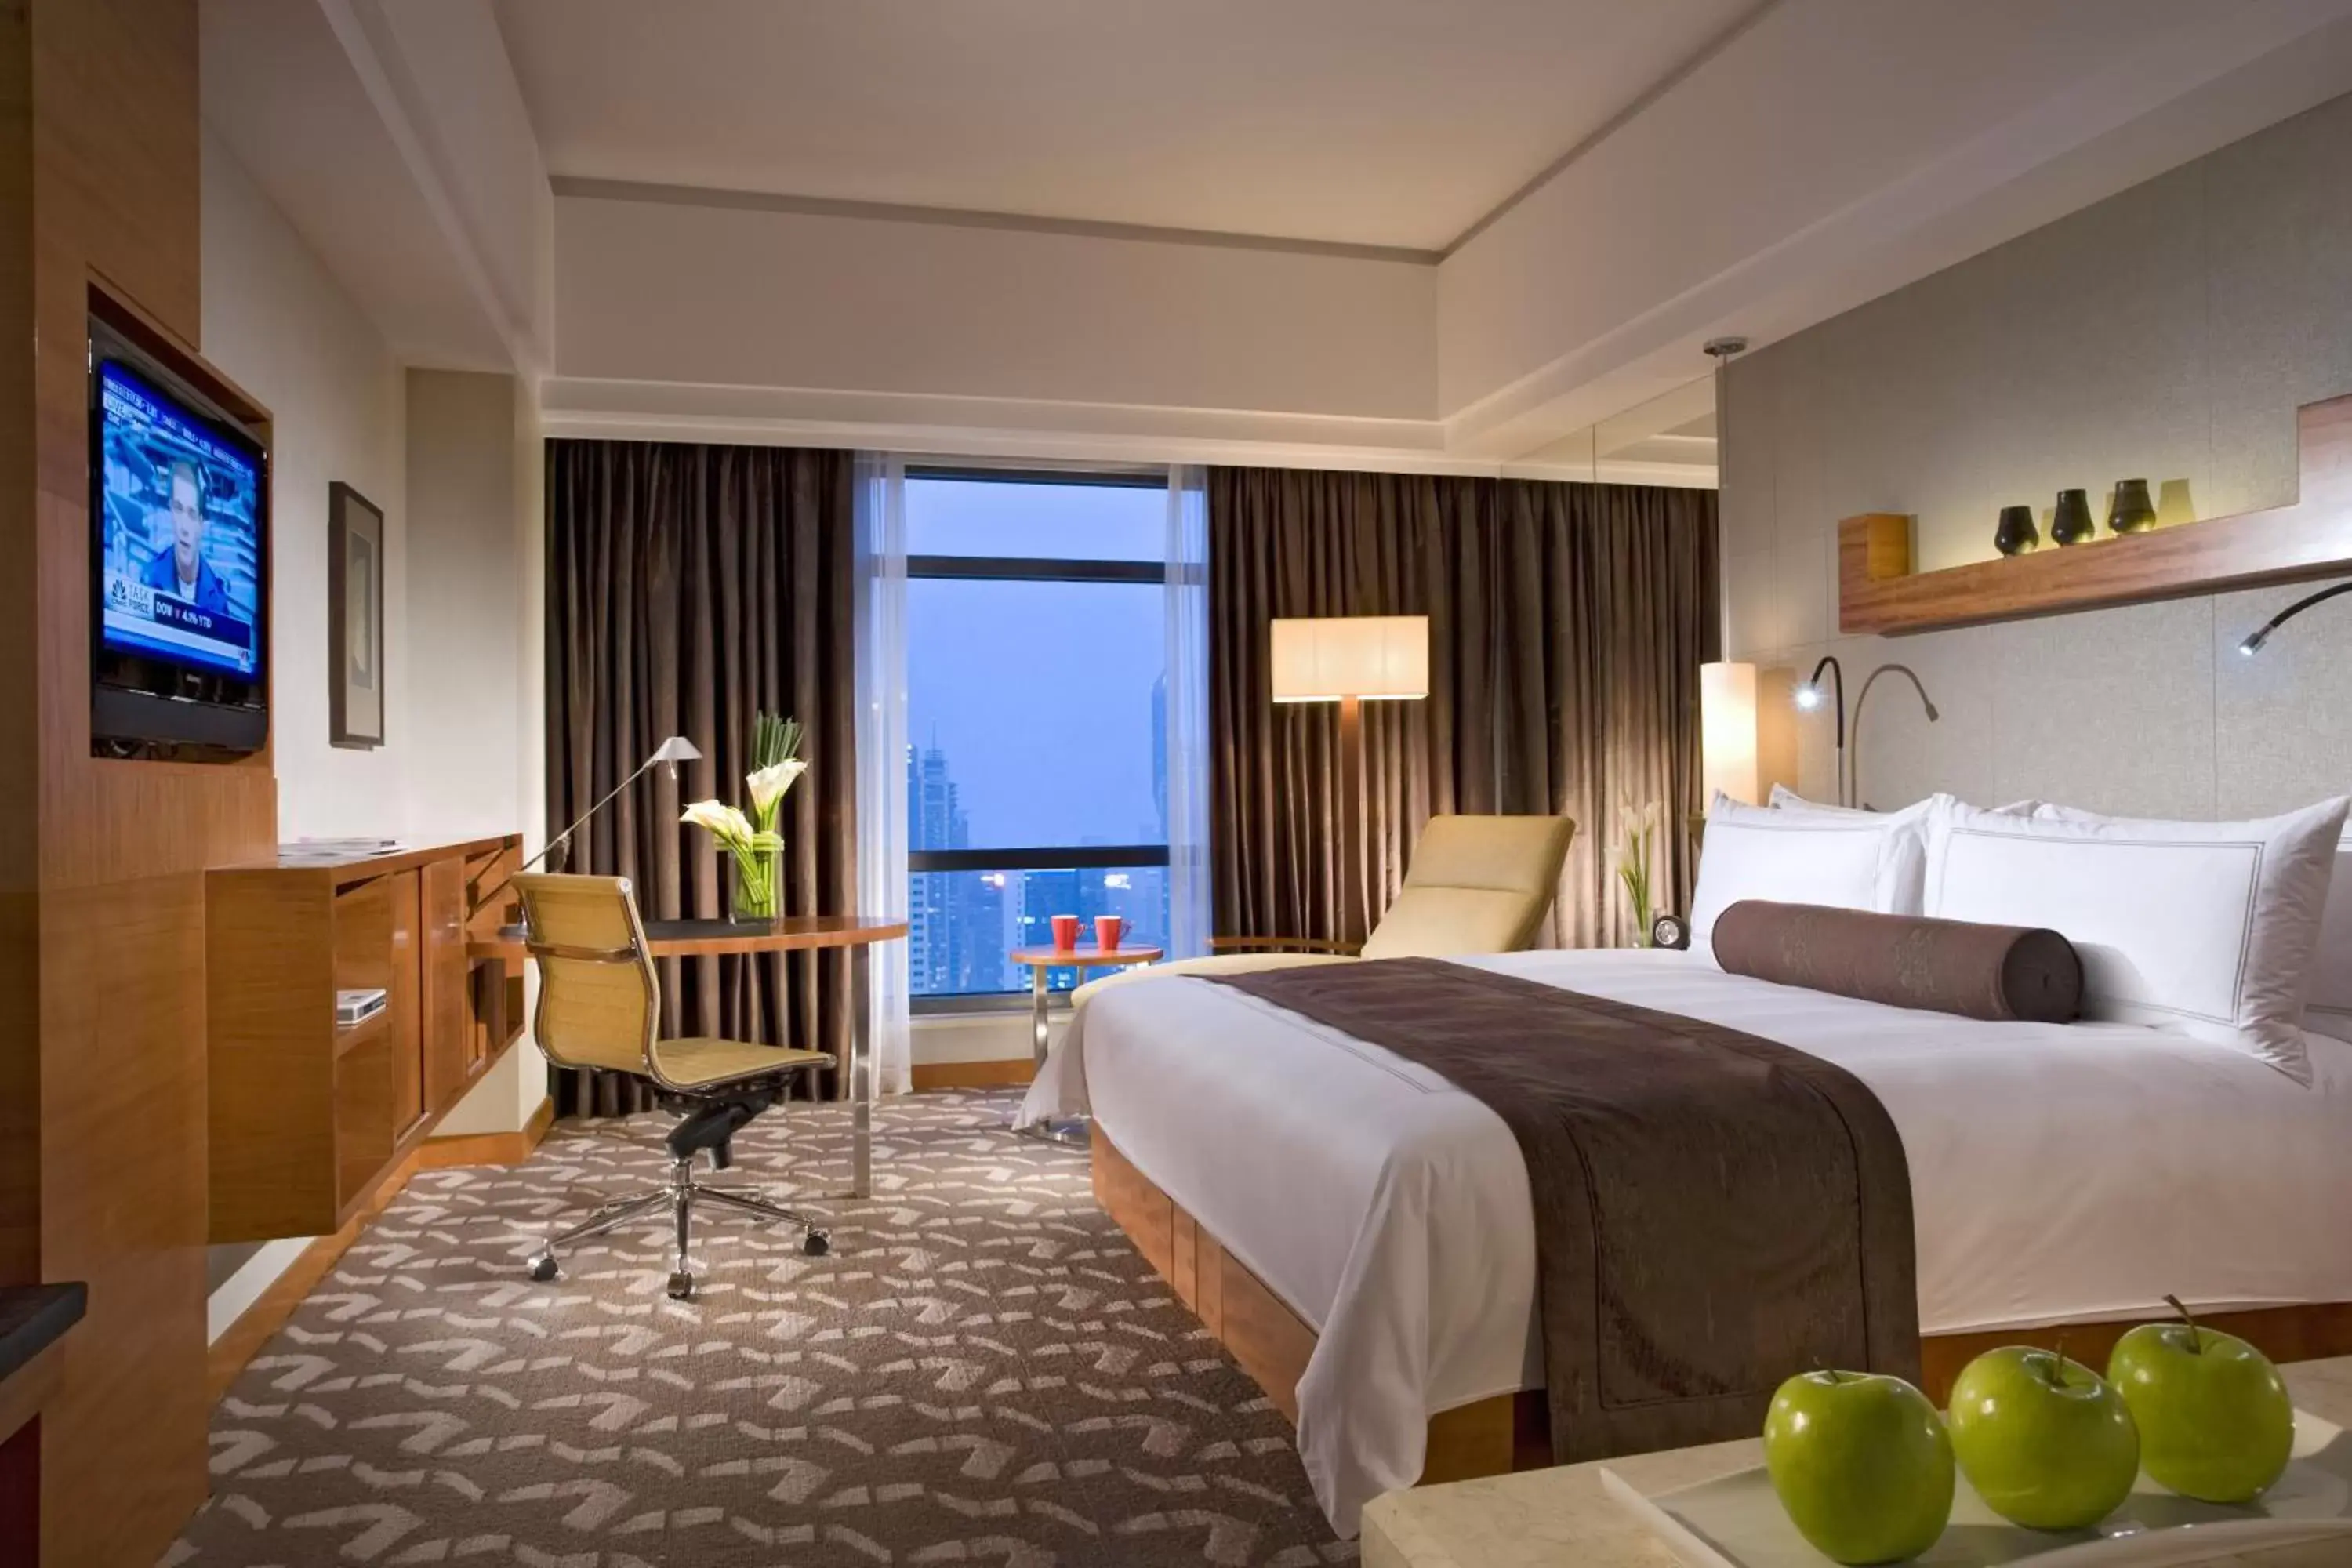 Bedroom in Swissotel Foshan, Guangdong - Free shuttle bus during canton fair complex during canton fair period